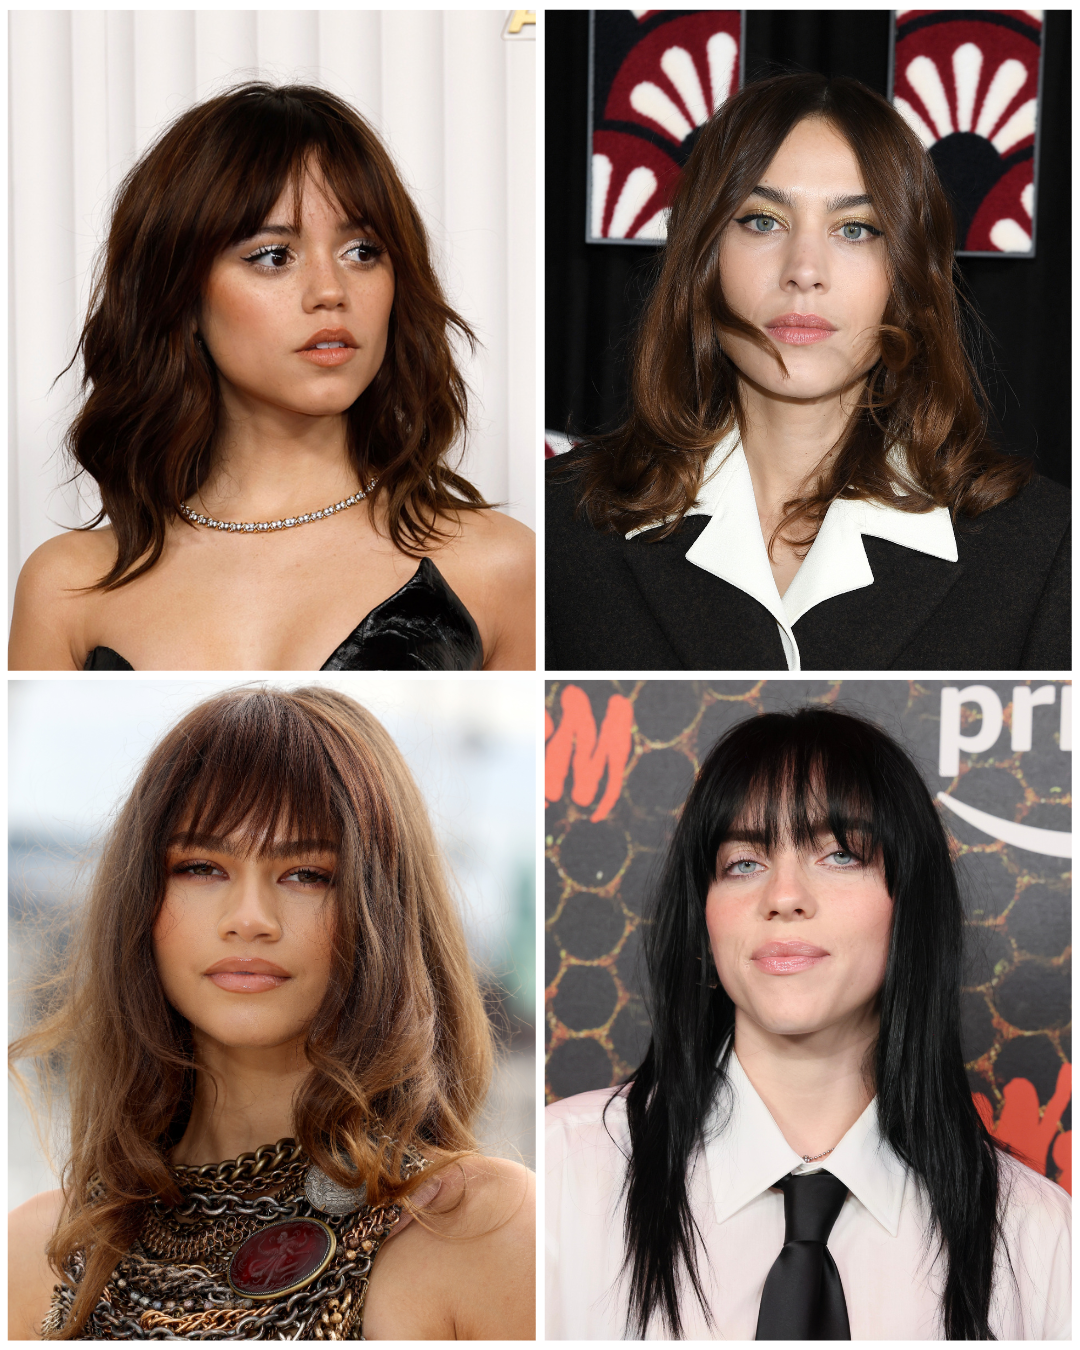 39 Hairstyles For Greasy Hair That Will Make You Want To Skip Wash Day |  Glamour UK